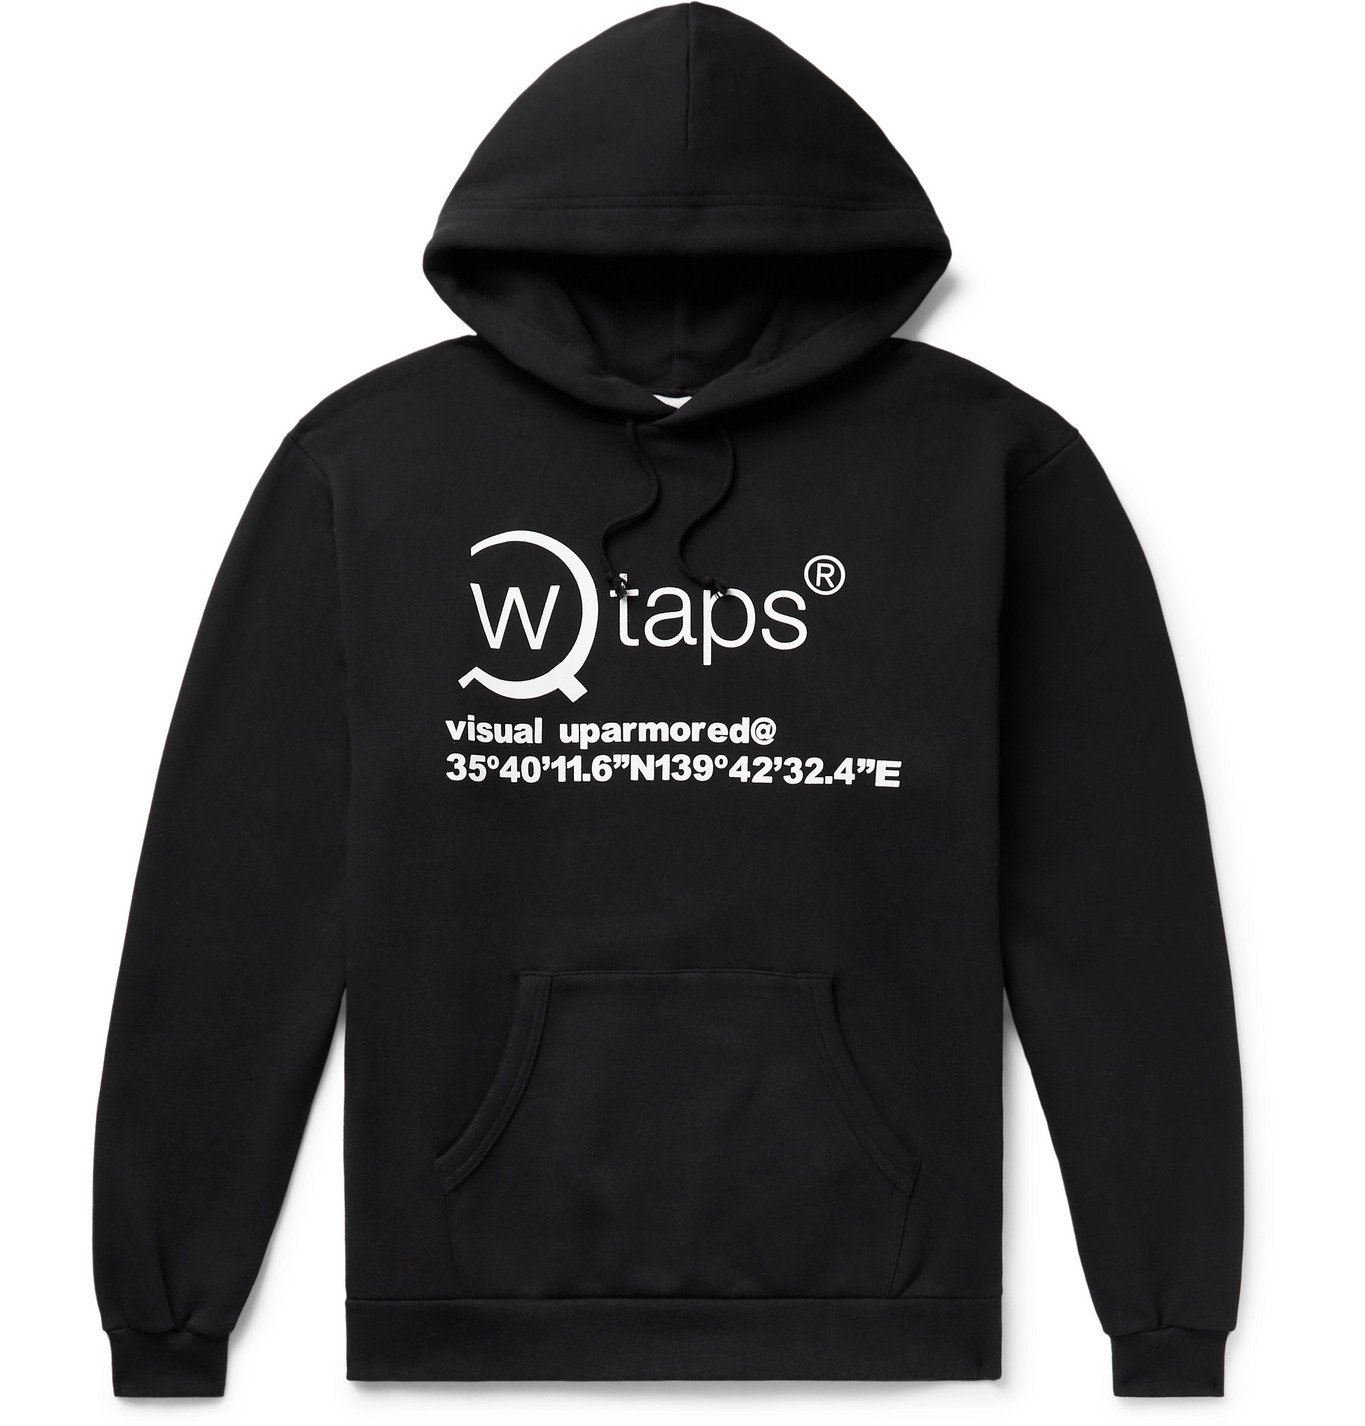 WTAPS VISUAL UPARMORED HOODY XL NAVY-